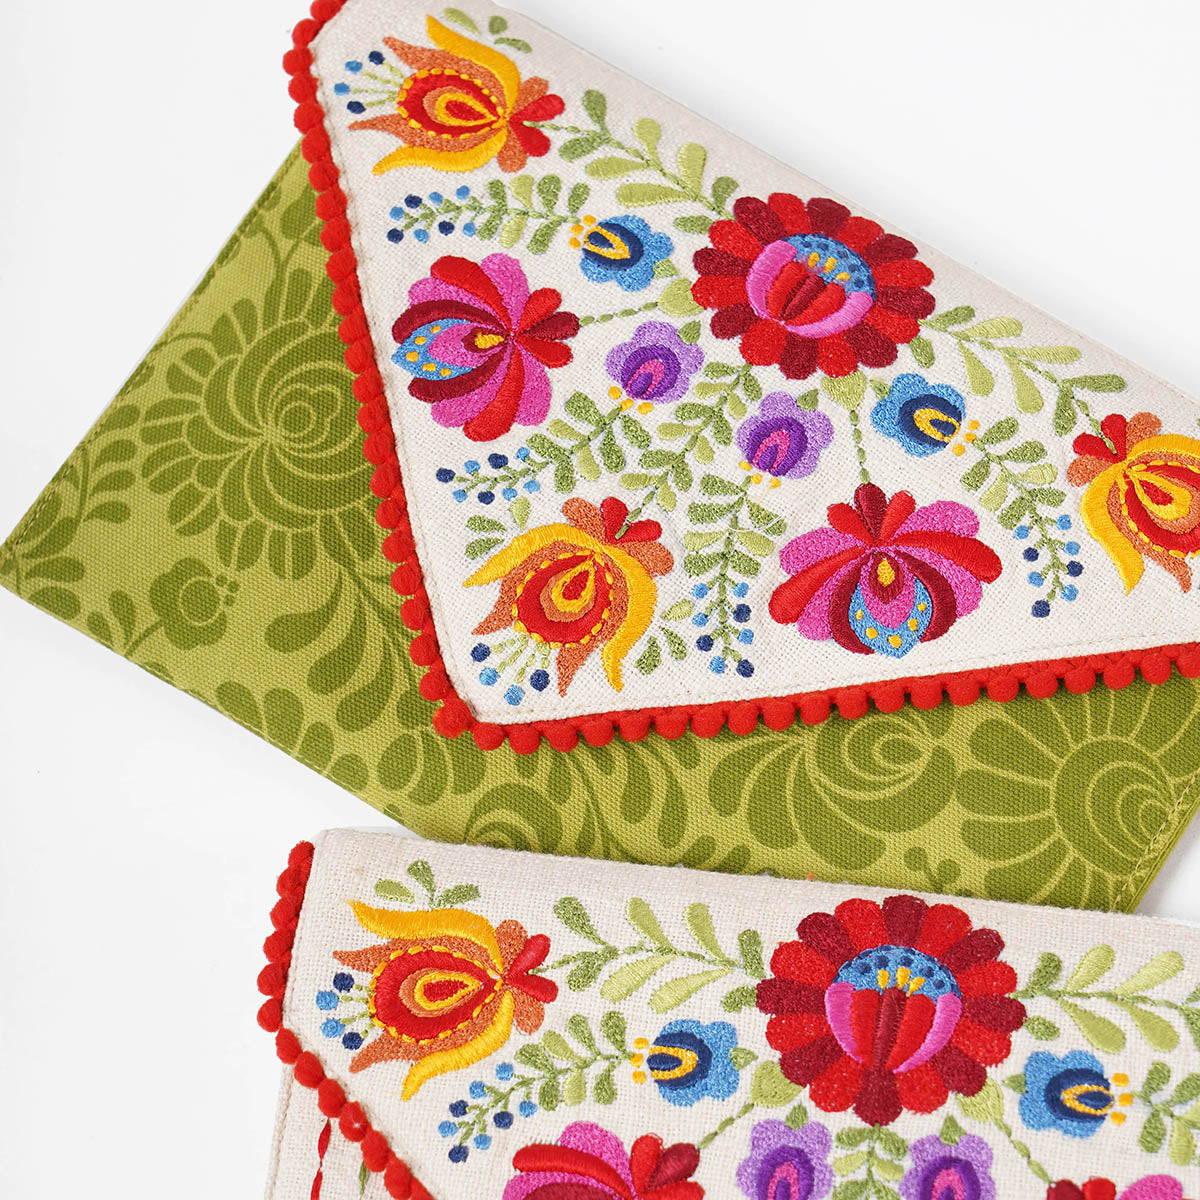 Matyo - Green colour Printed and Embroidered Envelope clutch, foldover purse,6X9 inches